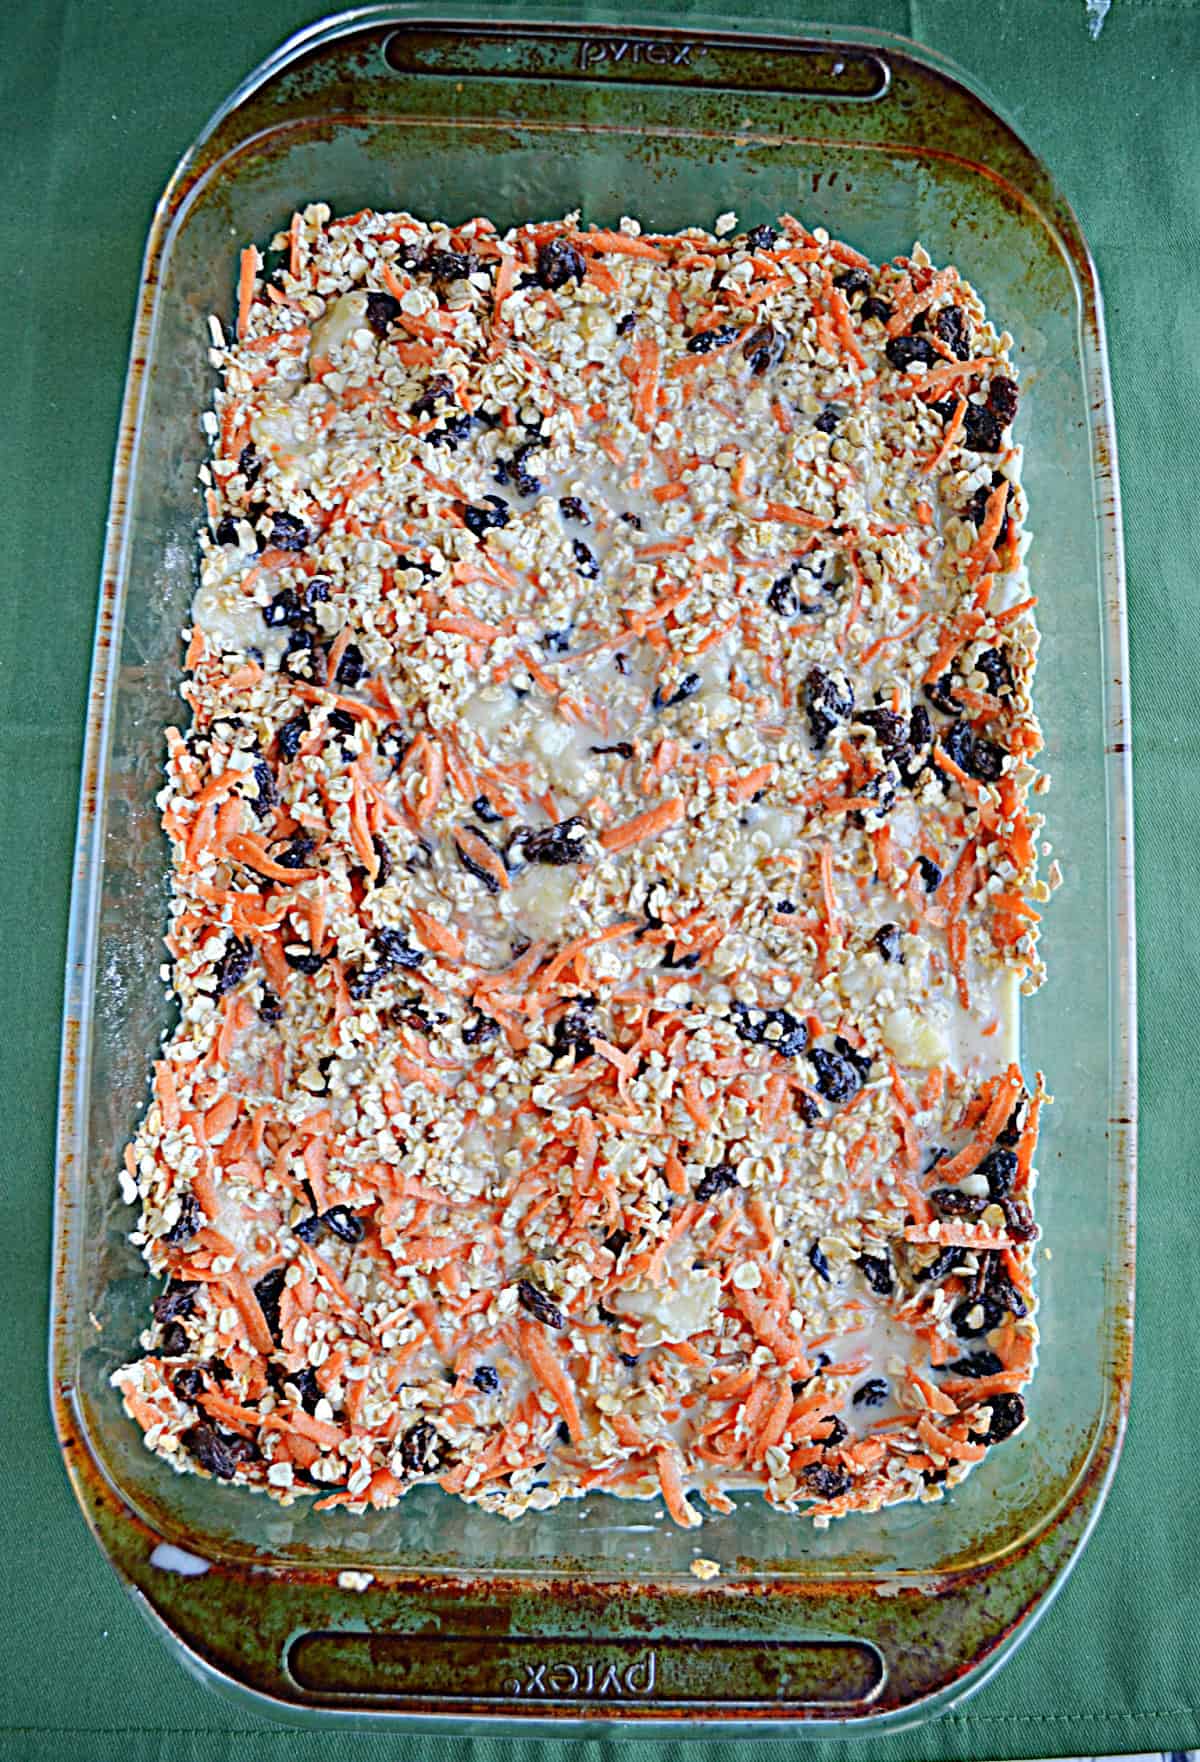 A pan of baked carrot cake oatmeal.